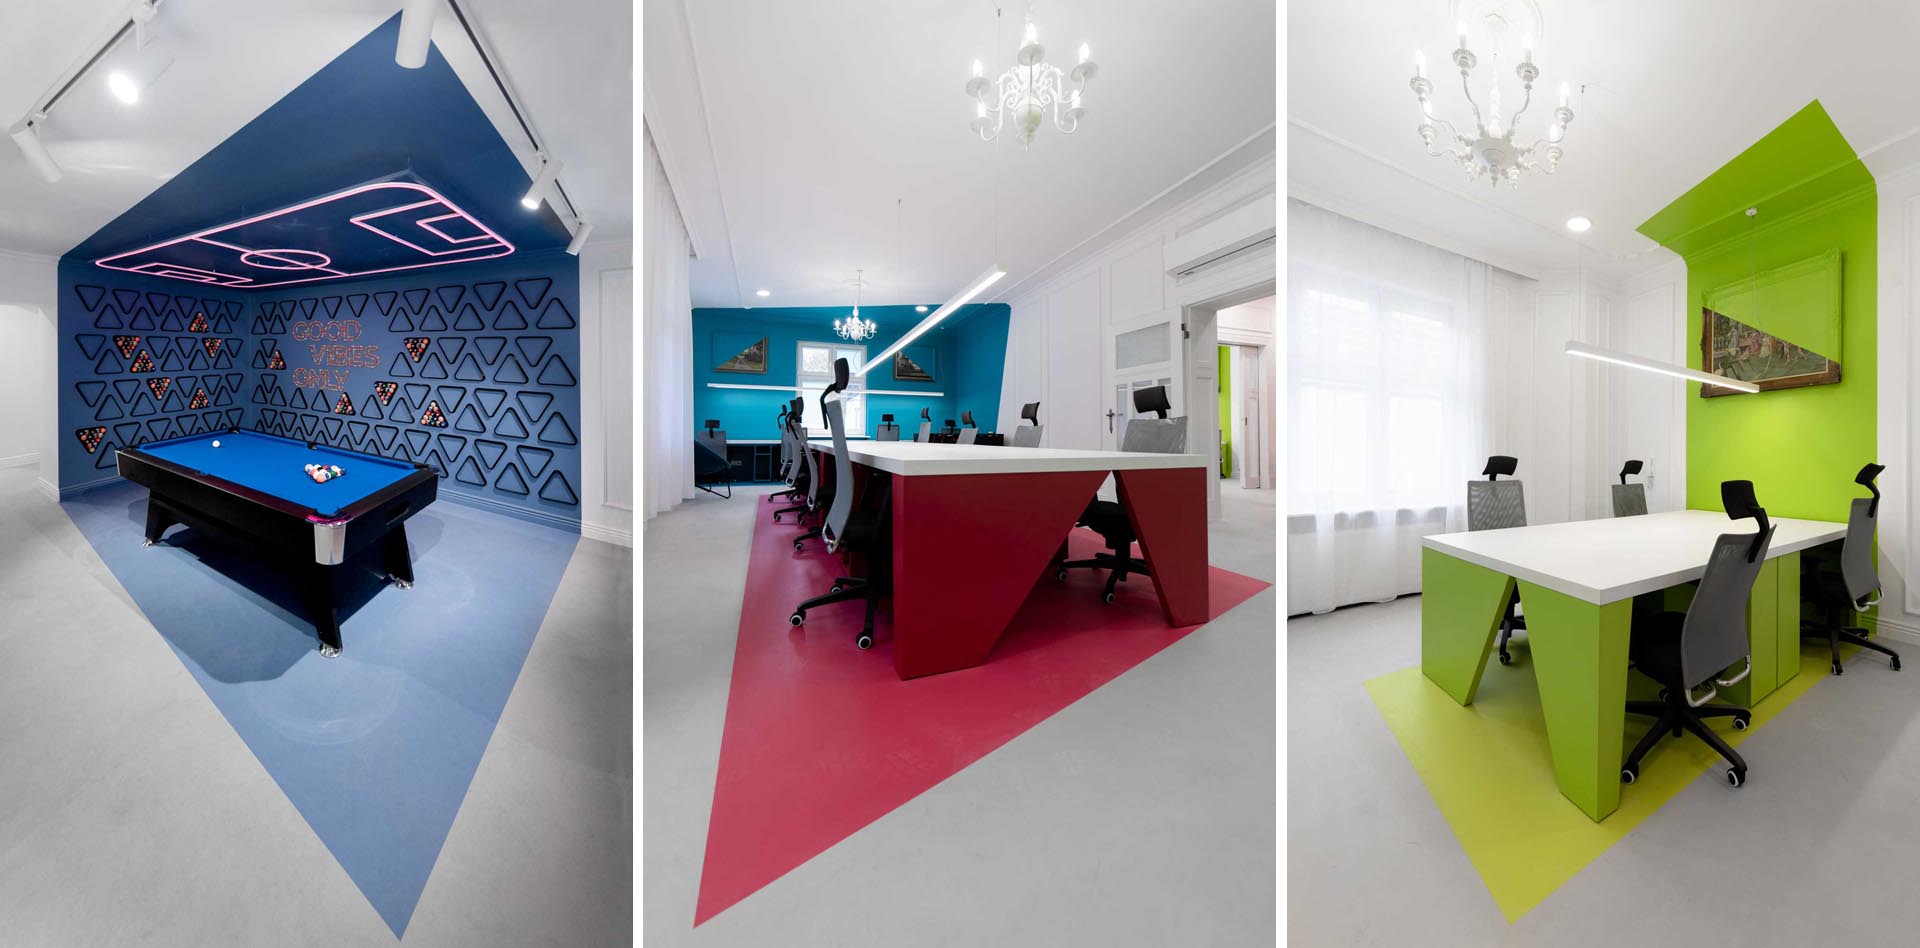 A modern office includes walls of bold colors in abstract designs.